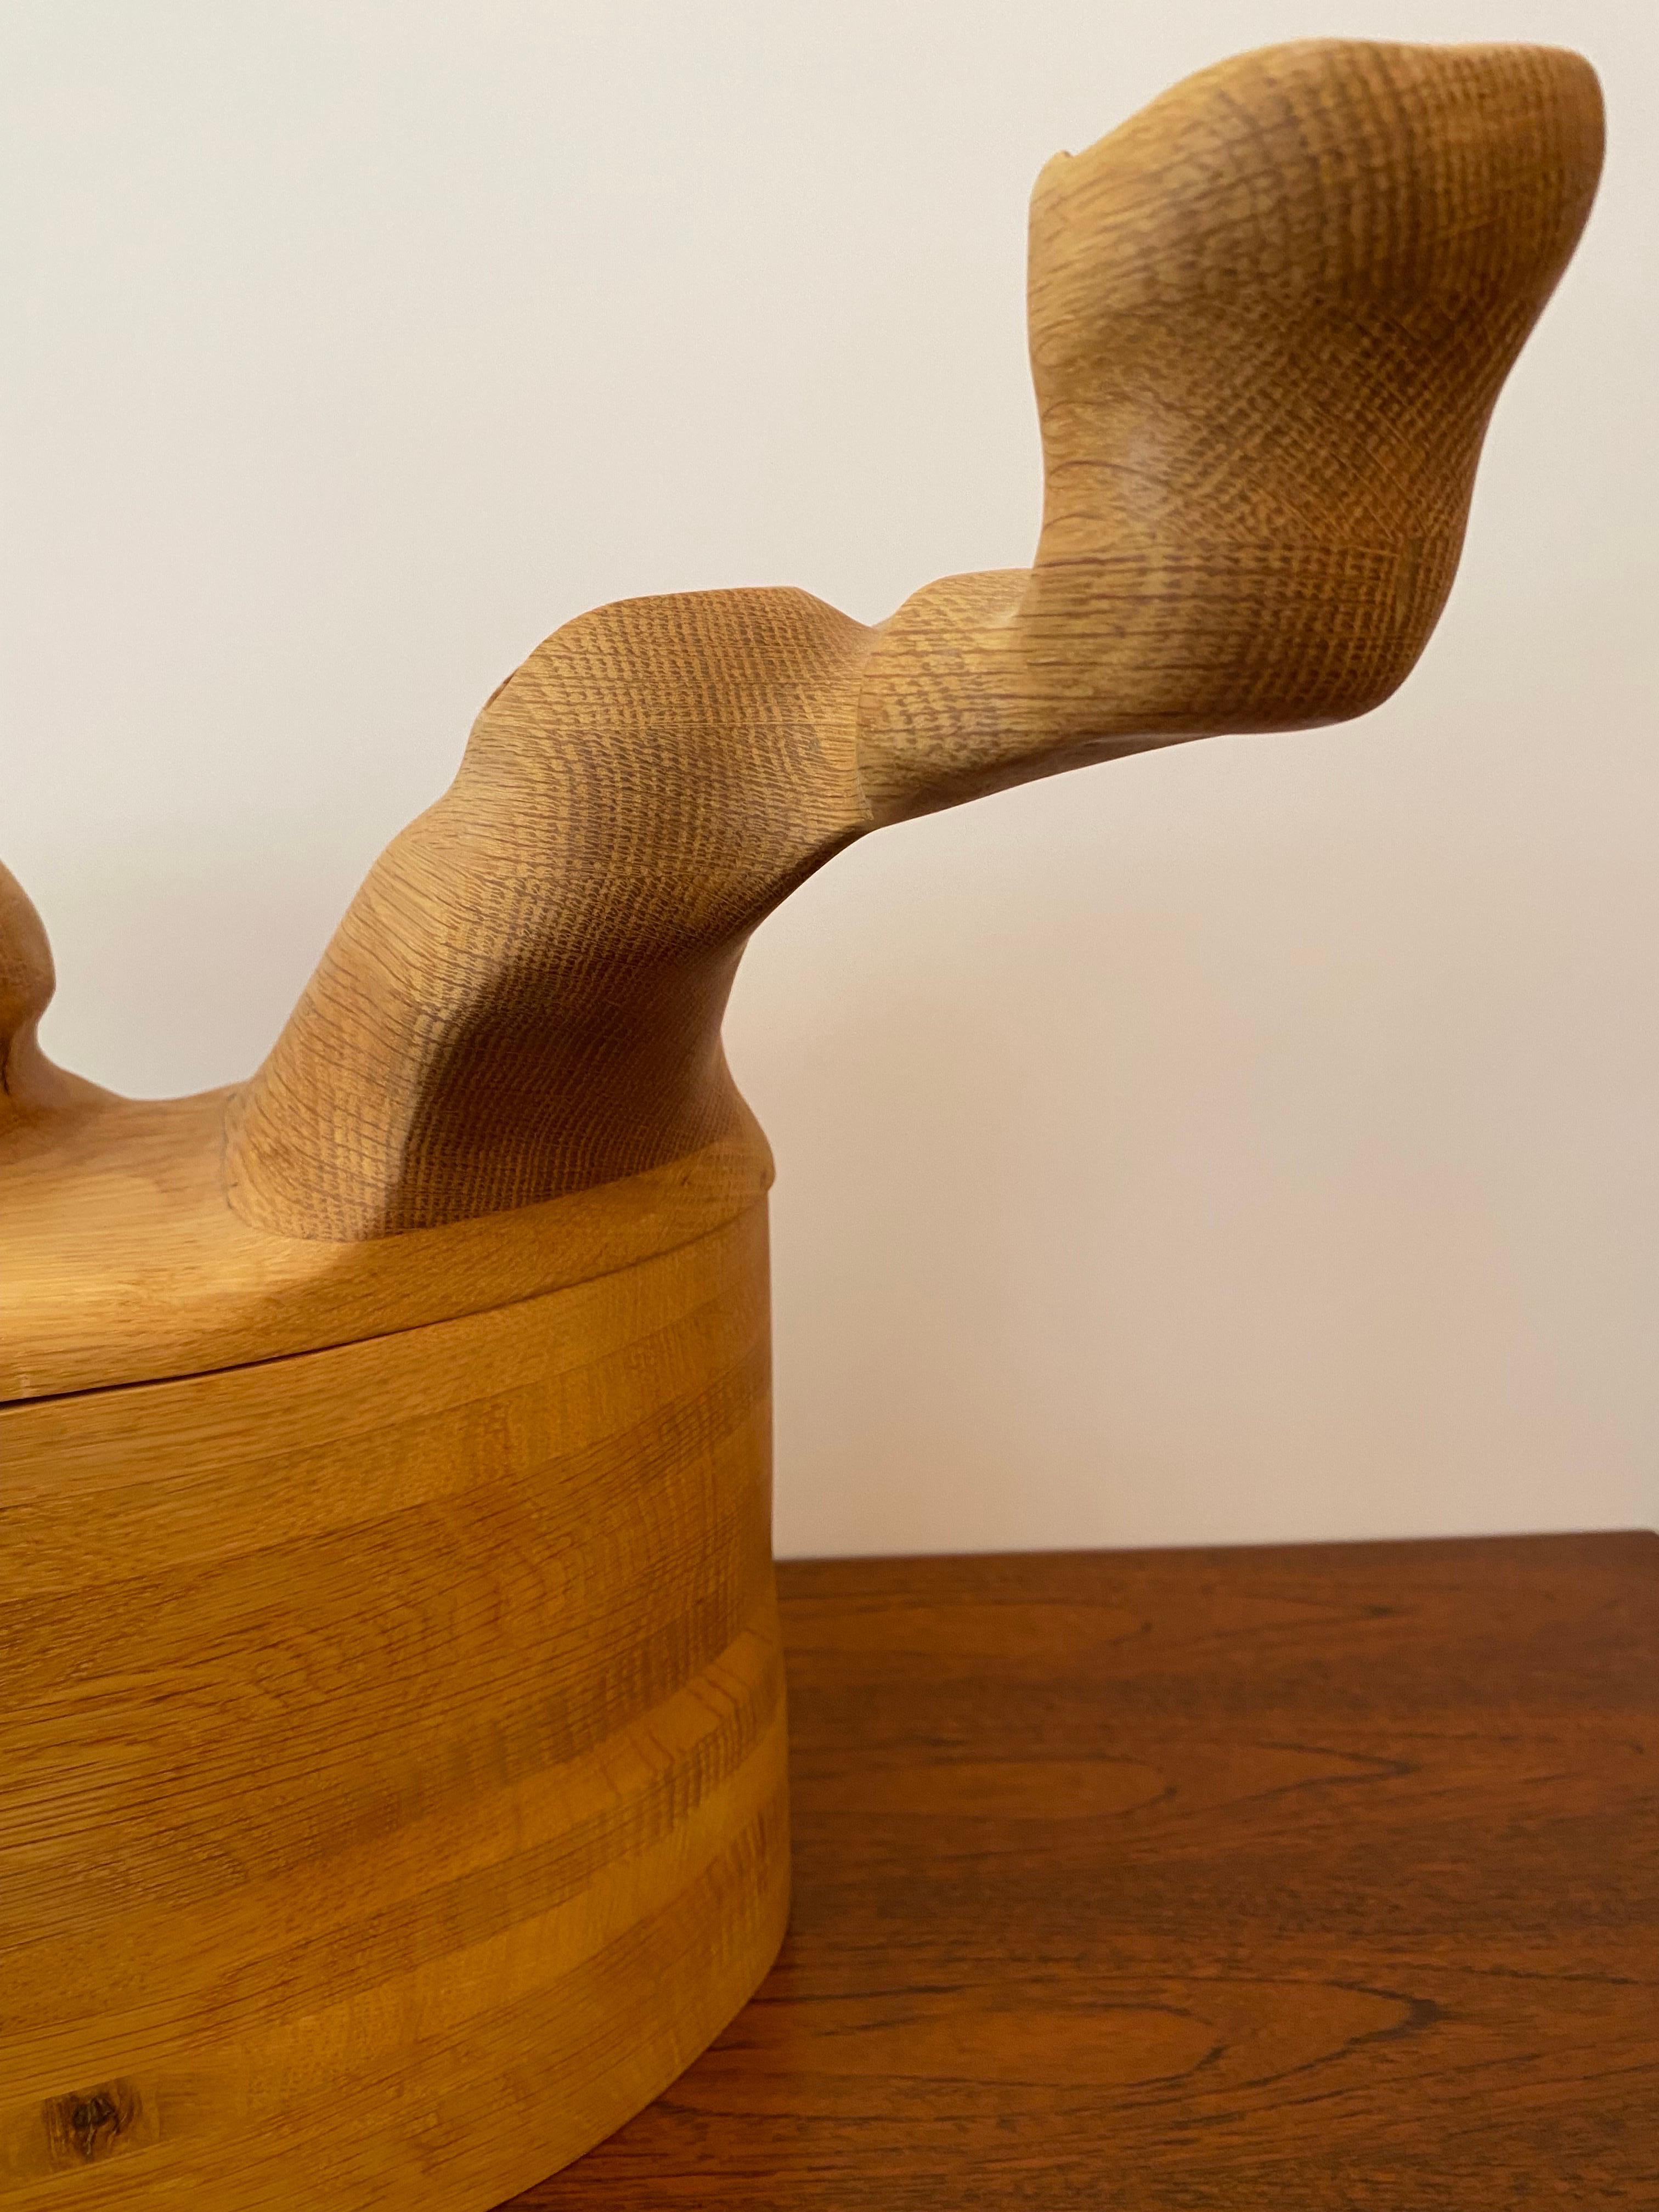 The beauty of this box sculpture is its affinity to the geological formations of the Badlands in South Dakota. In their form you can see the deposition (accumulation) of the oak wood grain and the erosion (sanding) of its surface. It opens and can